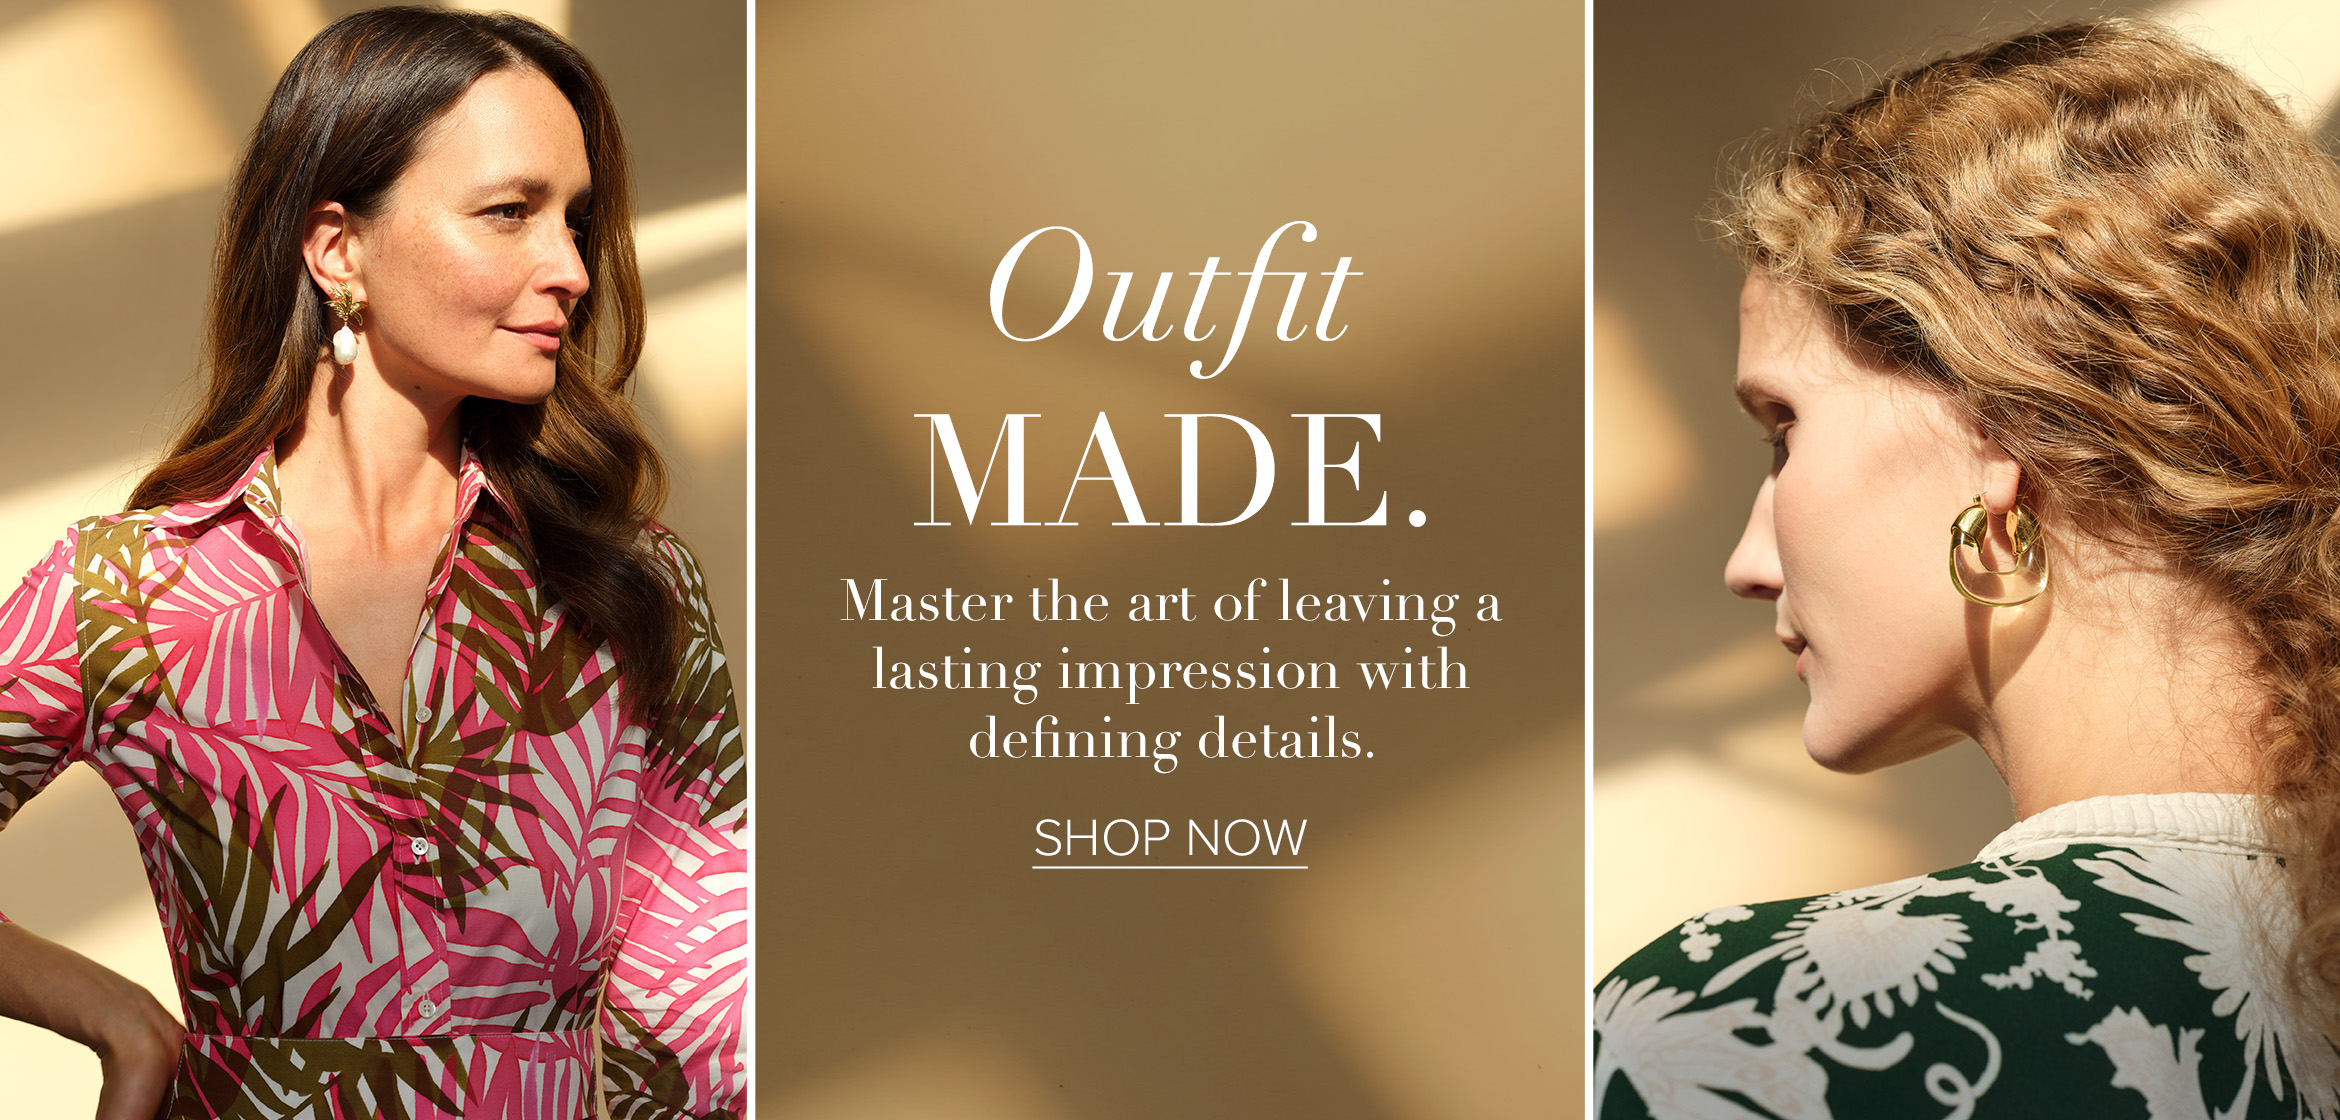 Outfit MADE Master the art of leaving a lasting impression with defining details. SHOP NOW